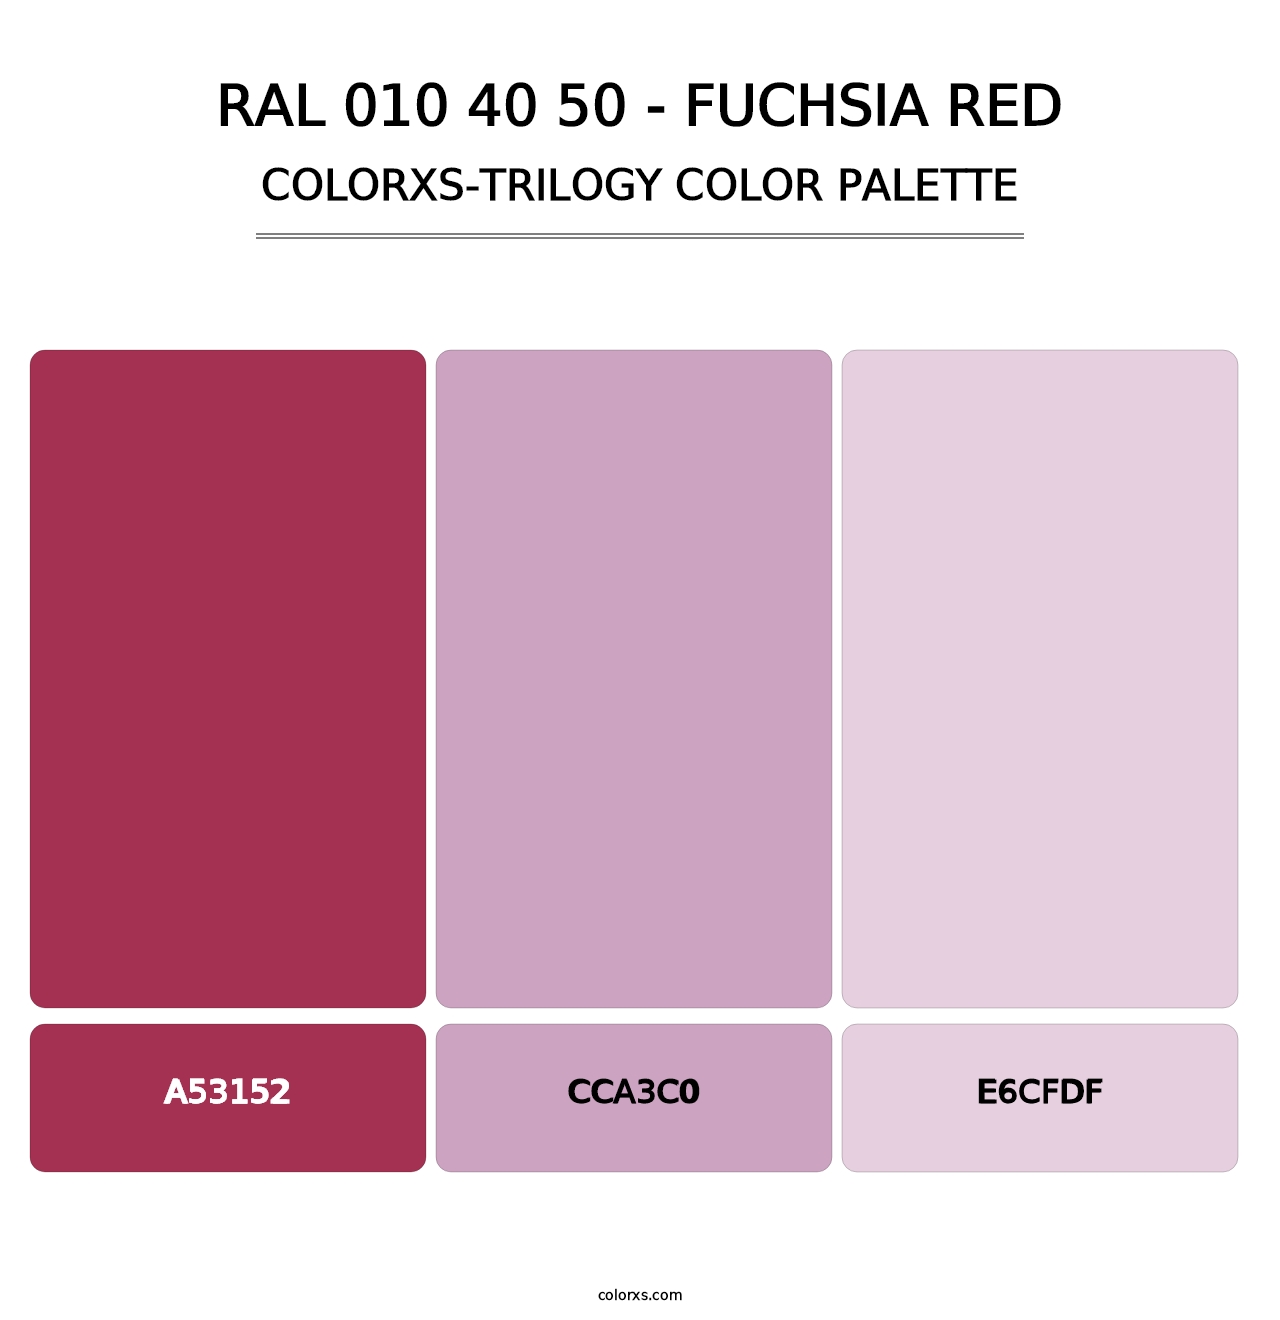 RAL 010 40 50 - Fuchsia Red - Colorxs Trilogy Palette